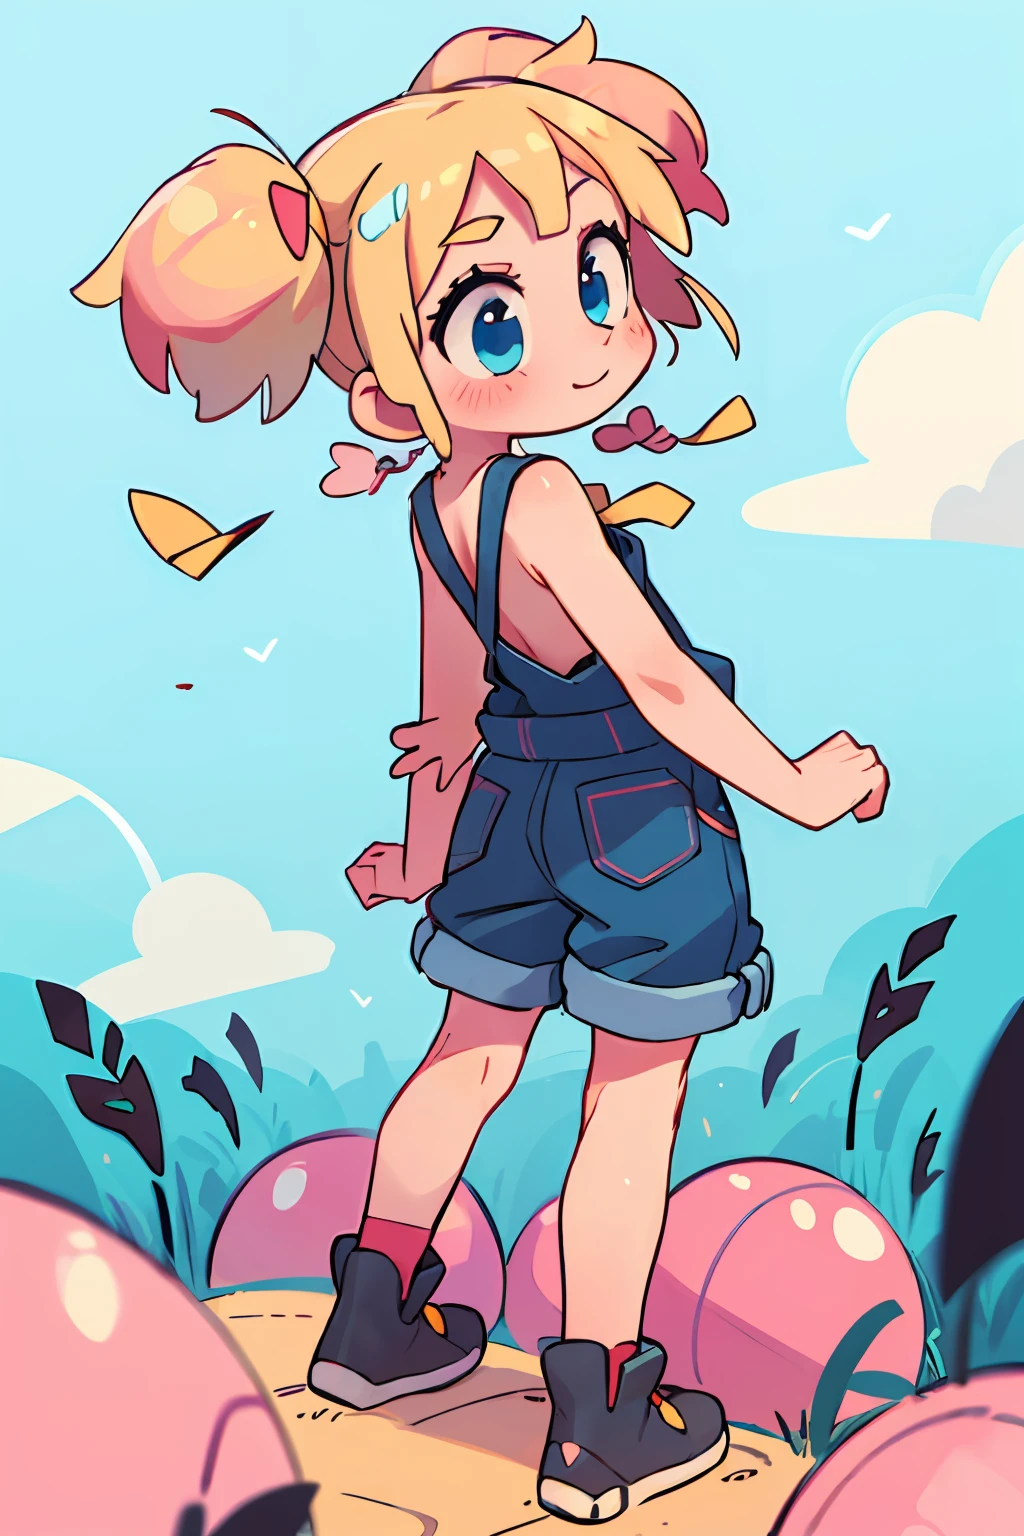 masterpiece, beautiful, 4k, detailed, intricate details, , , overalls, jean overalls, cuffed overalls, blonde hair, long blonde pigtails, hair ballies, pink hair tie balls, long flowing pigtails, soft blue eyes, soft smile, slight smile, hands back, standing on the balls of her feet, 1girl, rocking, shirtless, overalls over skin, bare shoulders, bare sleeves, bare arms